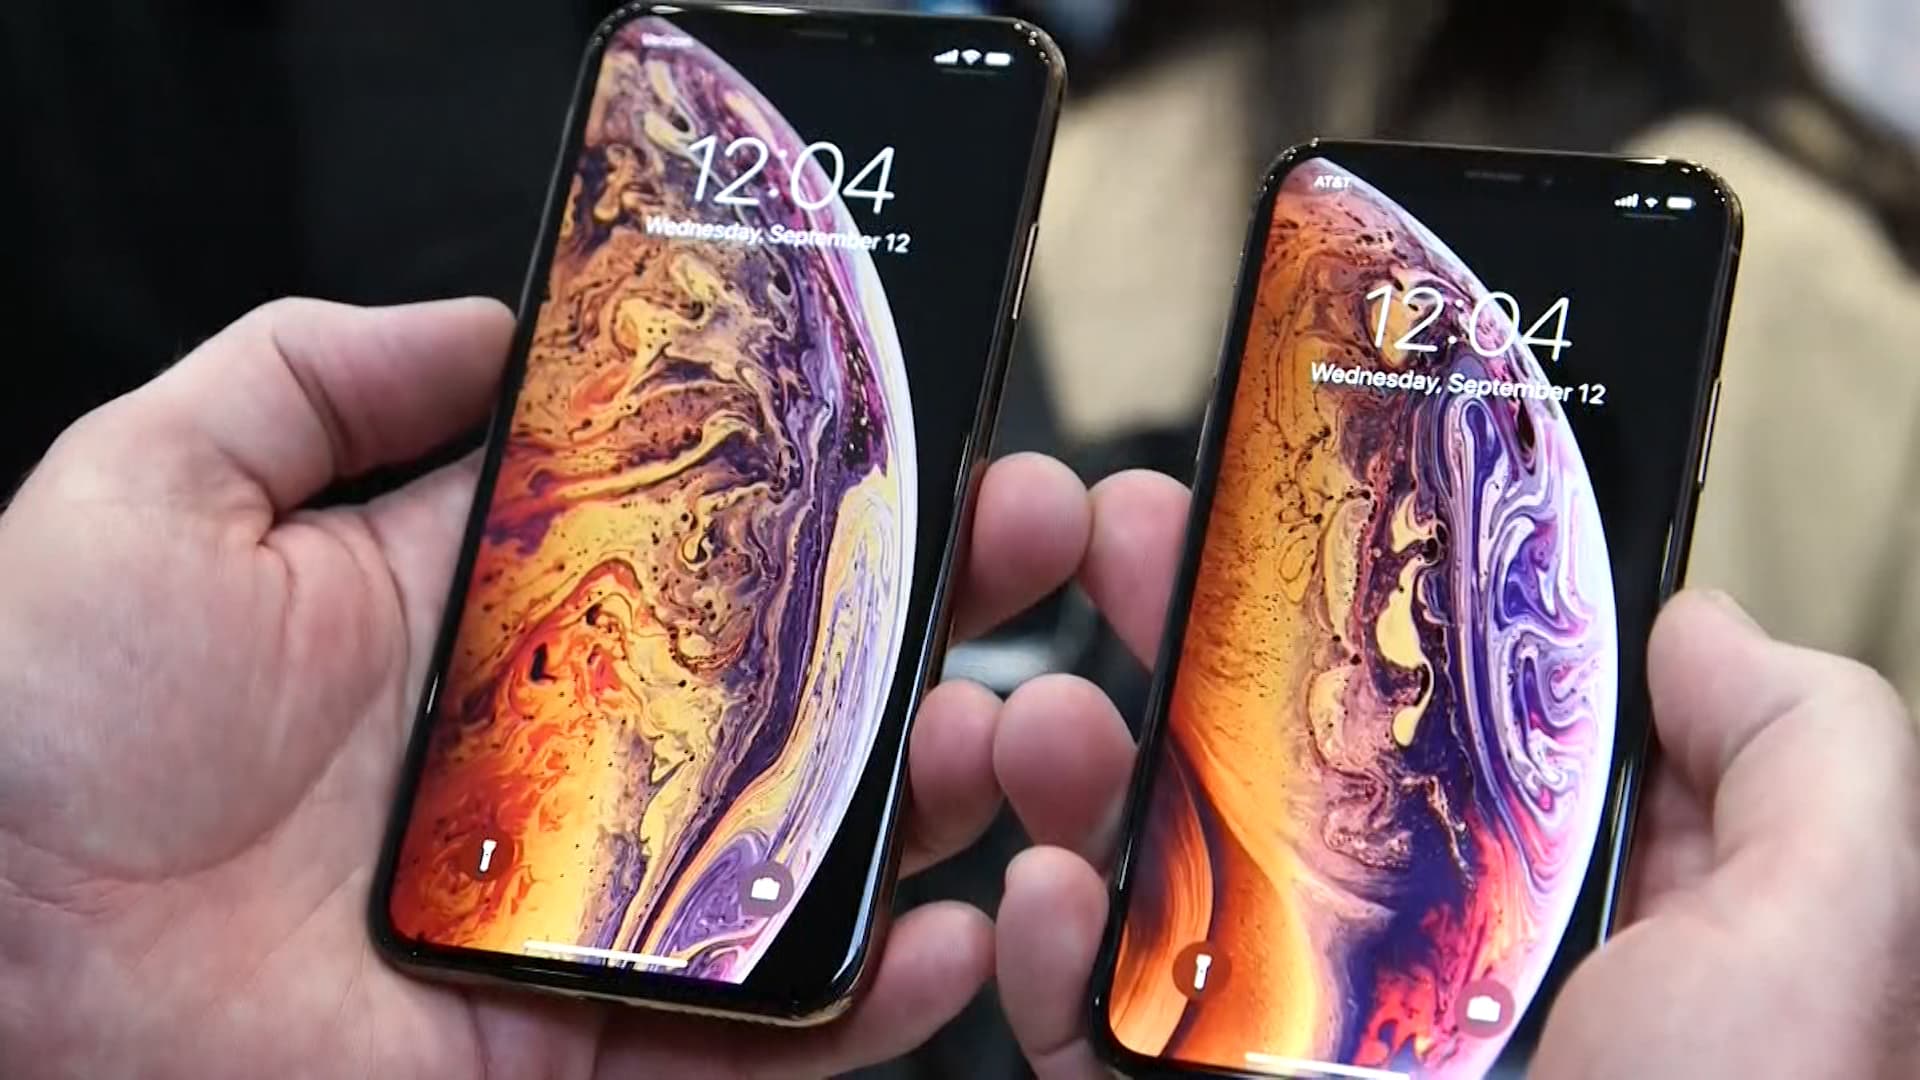 Apple announces iPhone XS, iPhone XS Max, iPhone XR: price, release date